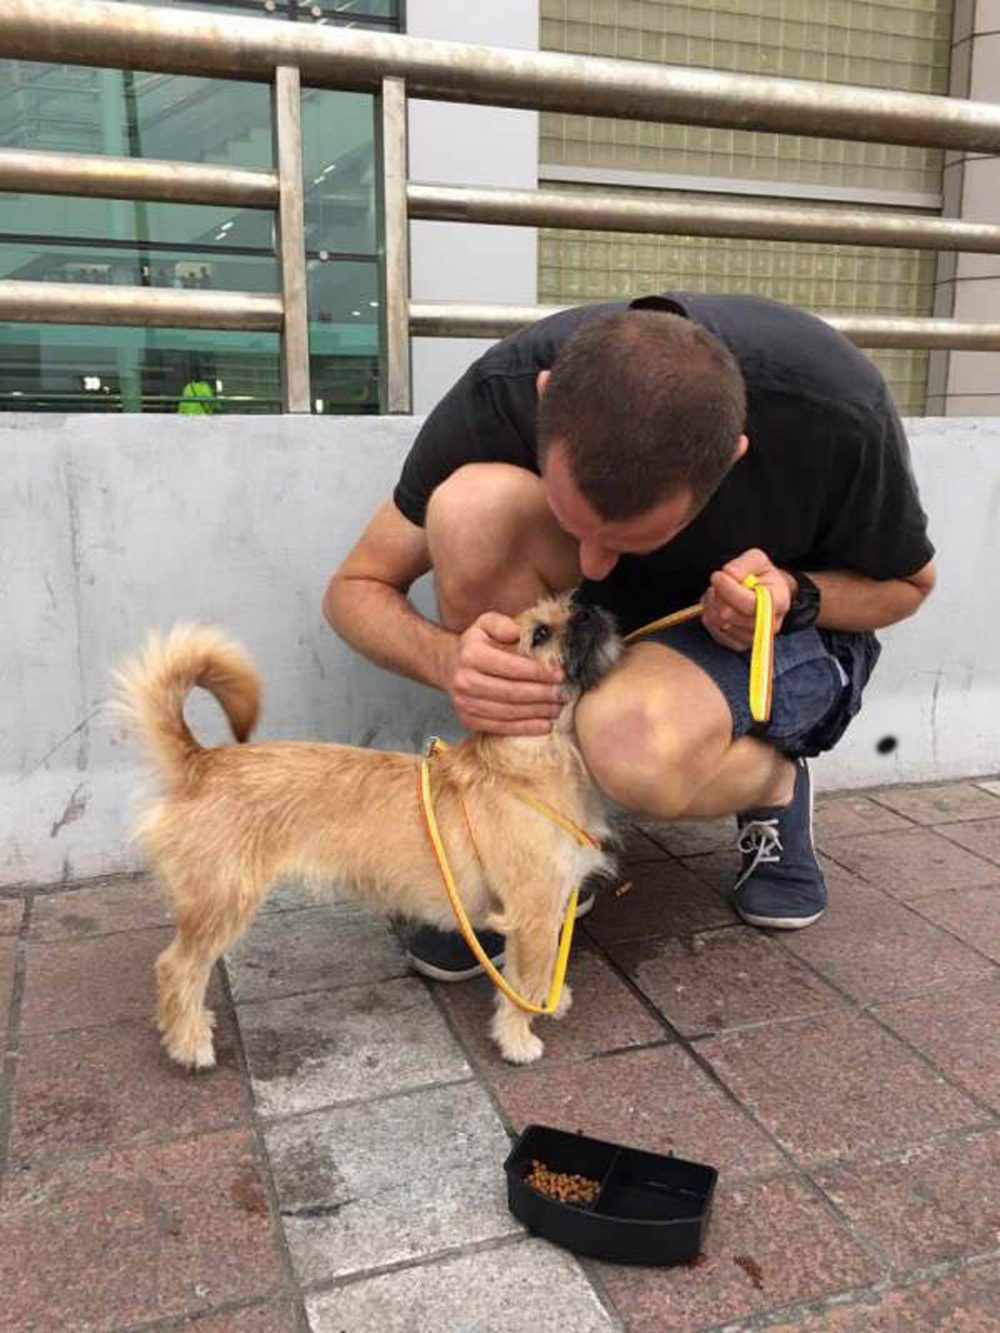 The lovable pooch nuzzles into his new owner before boarding the flight.